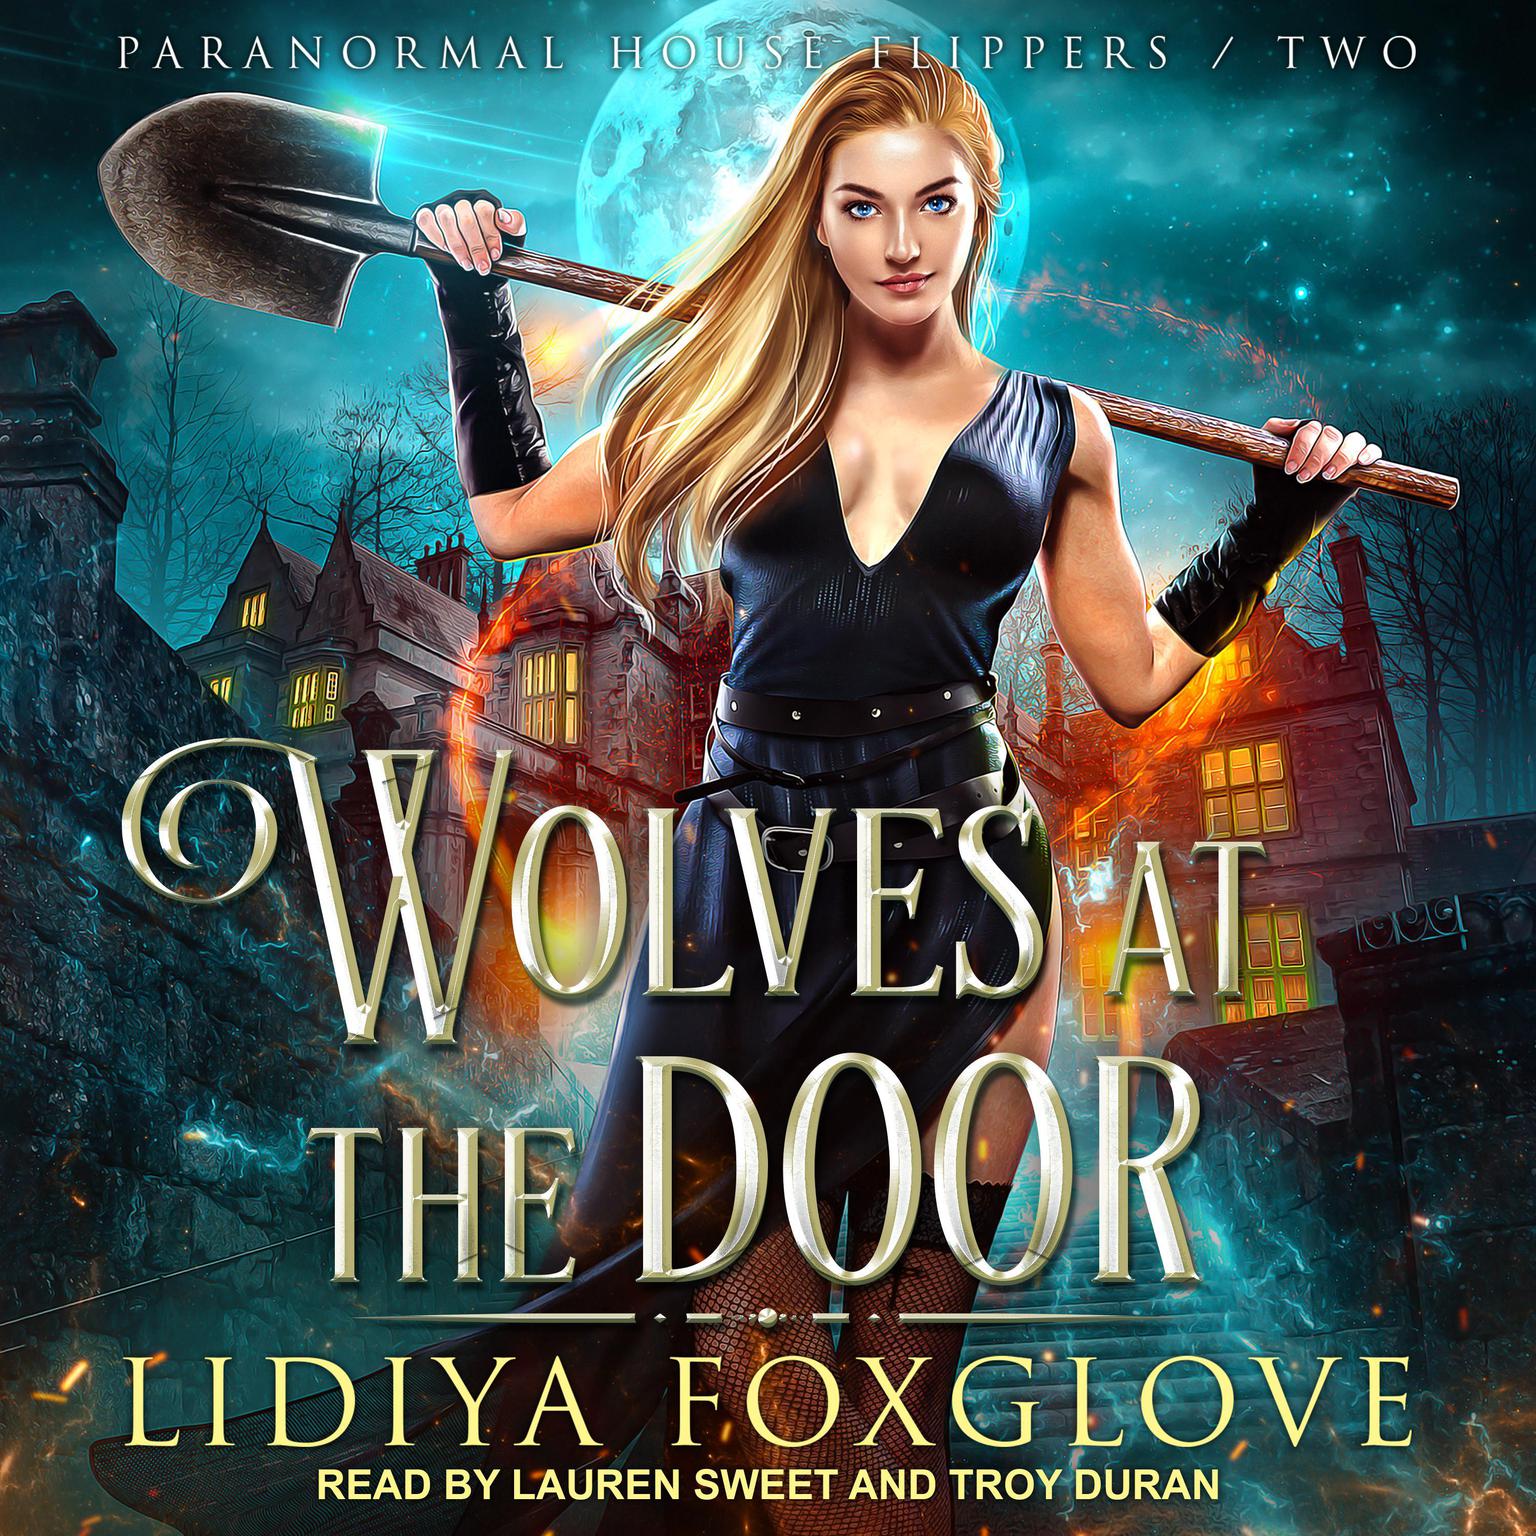 Wolves at the Door Audiobook by Lidiya Foxglove — Listen for 9.95